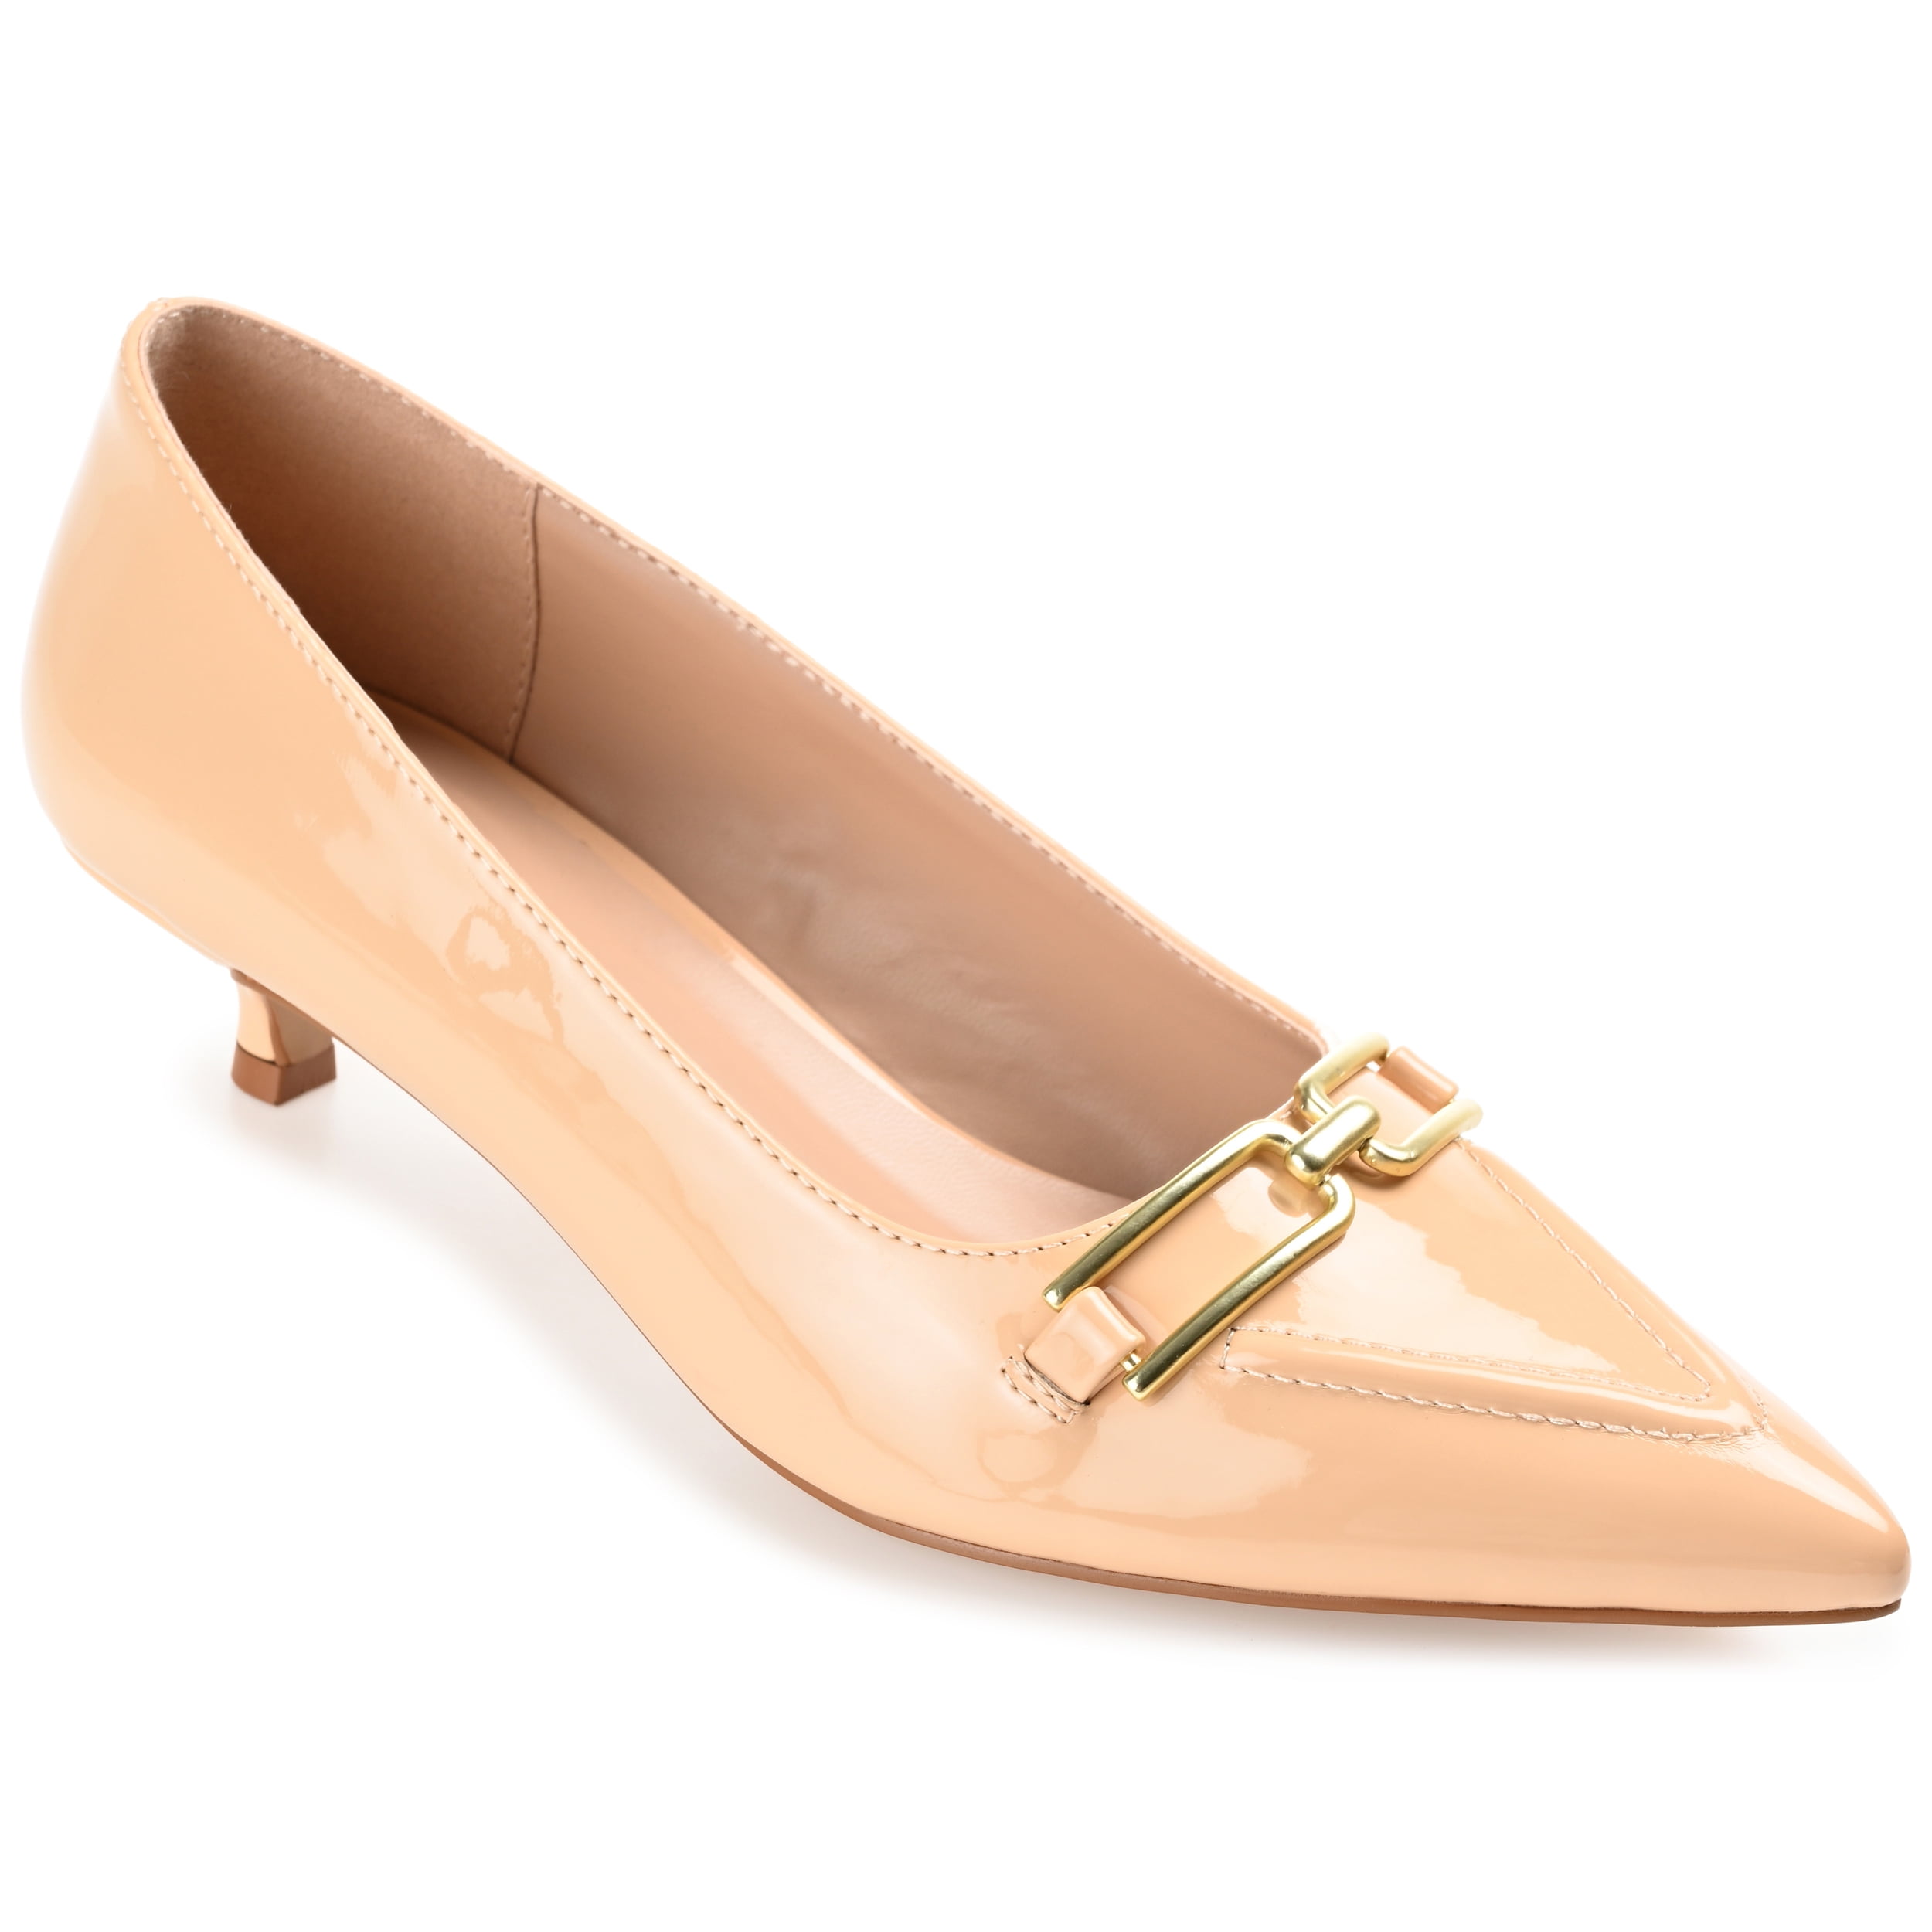 Circus NY Women's Susie Block Heel Loafer | Famous Footwear